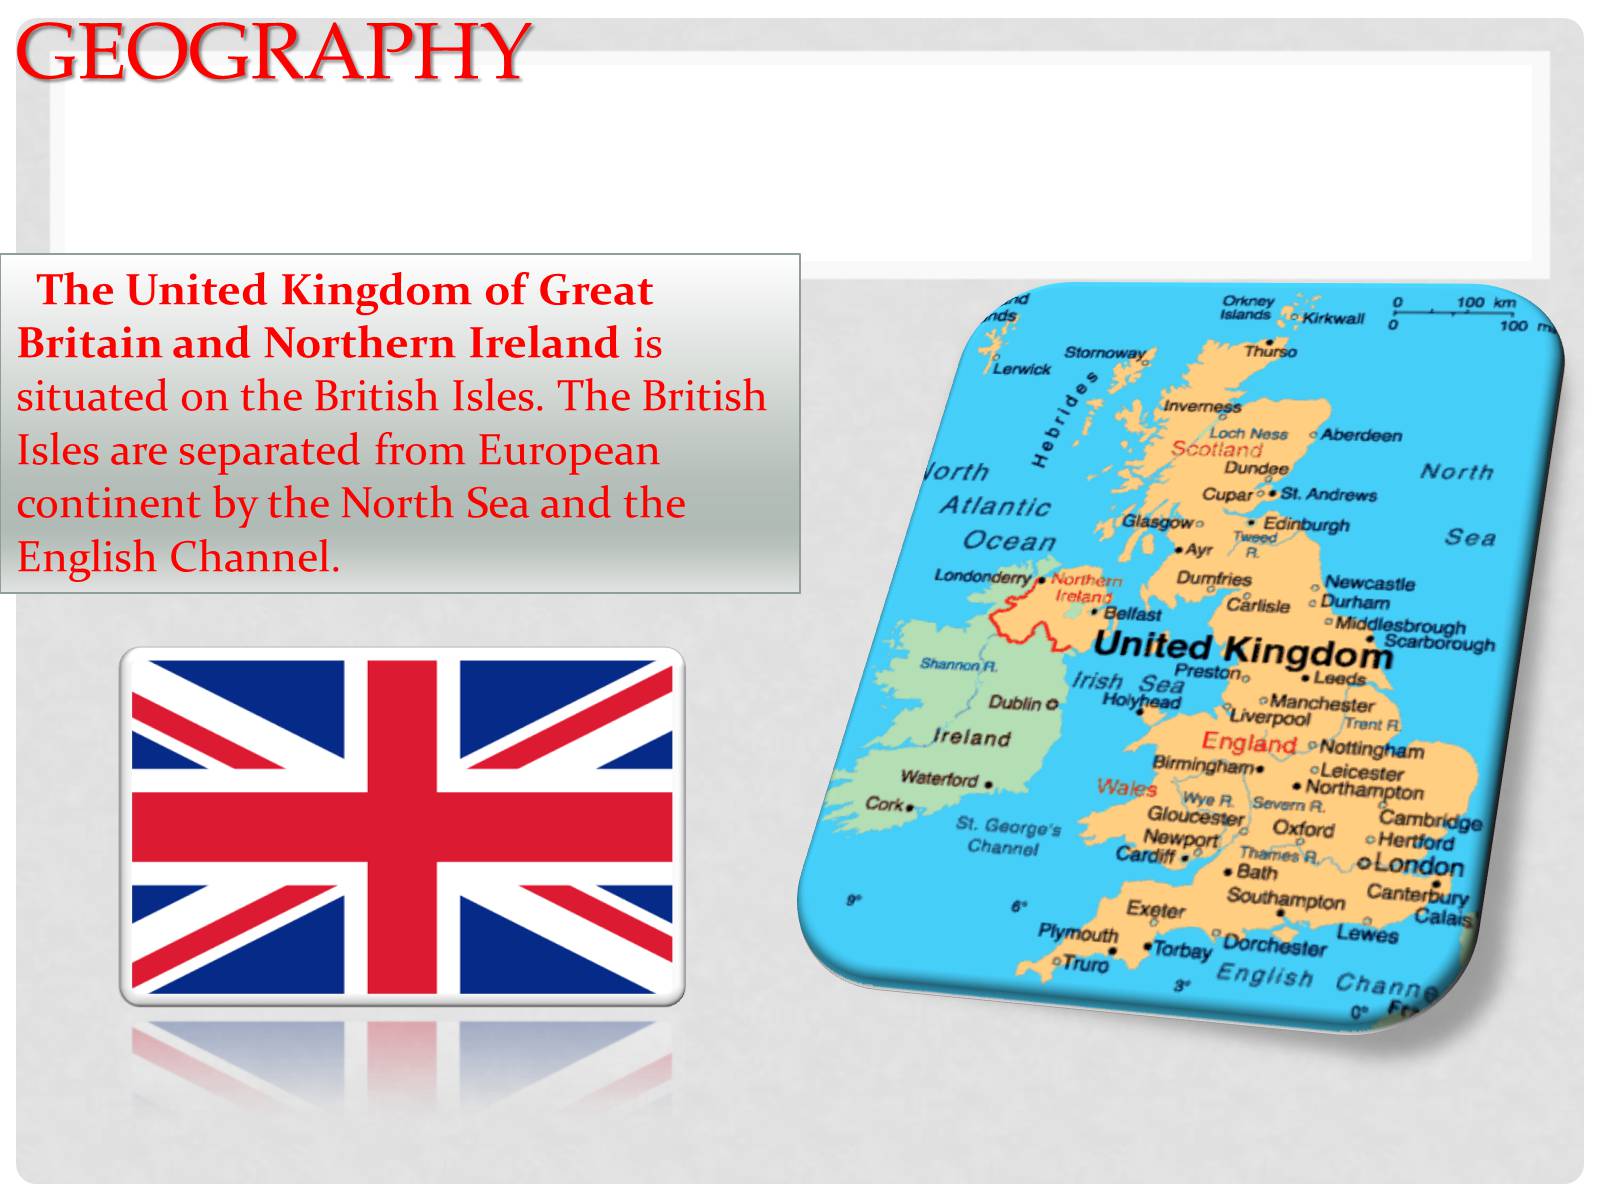 Great britain facts. The United Kingdom of great Britain and Northern Ireland Geography. Great Britain презентация. Cities of great Britain презентация. Презентация great British.